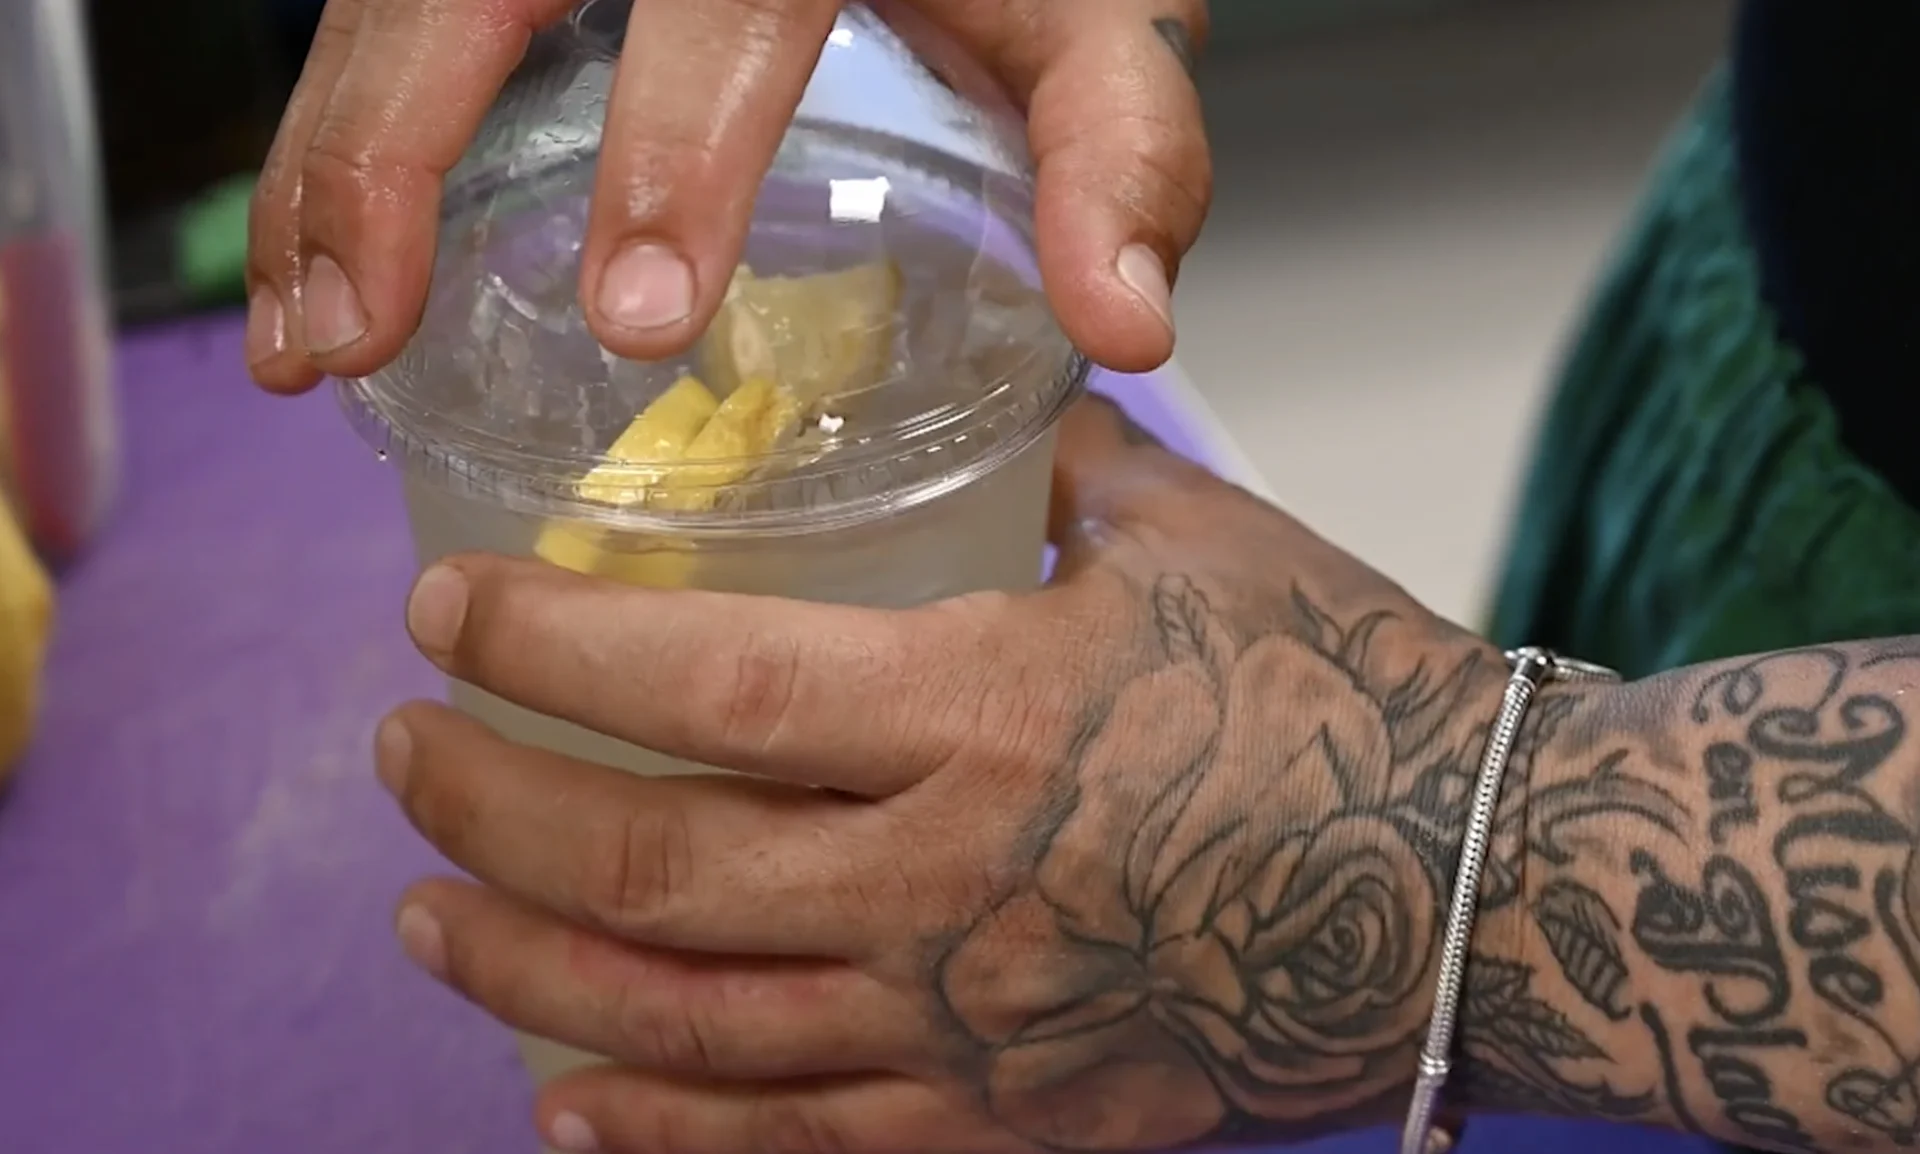 This B.C. cafe offers lemonade infused with 'plant medicine'